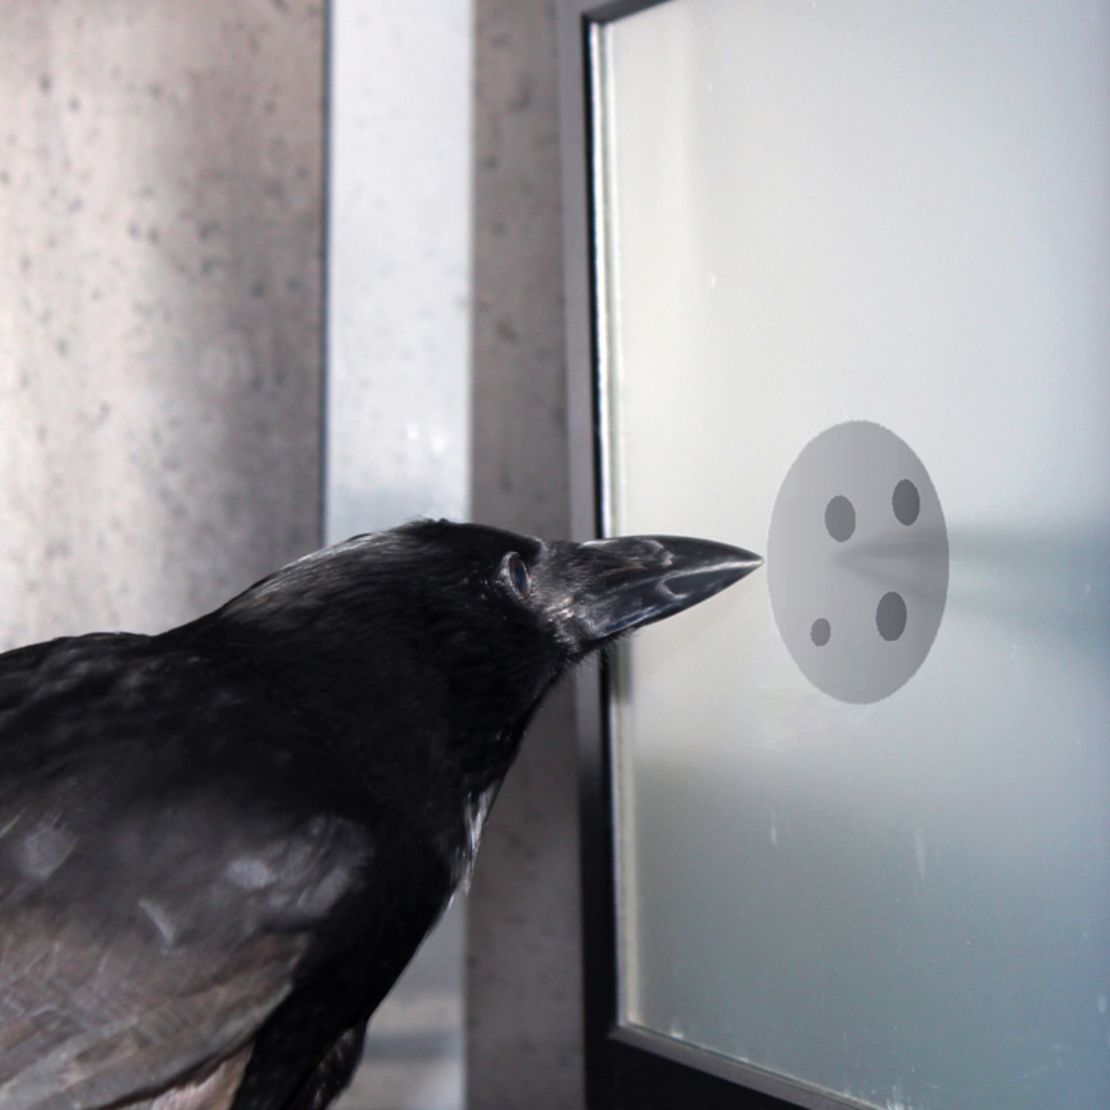 Crows recognize numbers of dots, regardless of size, shape or arrangement, a study says.